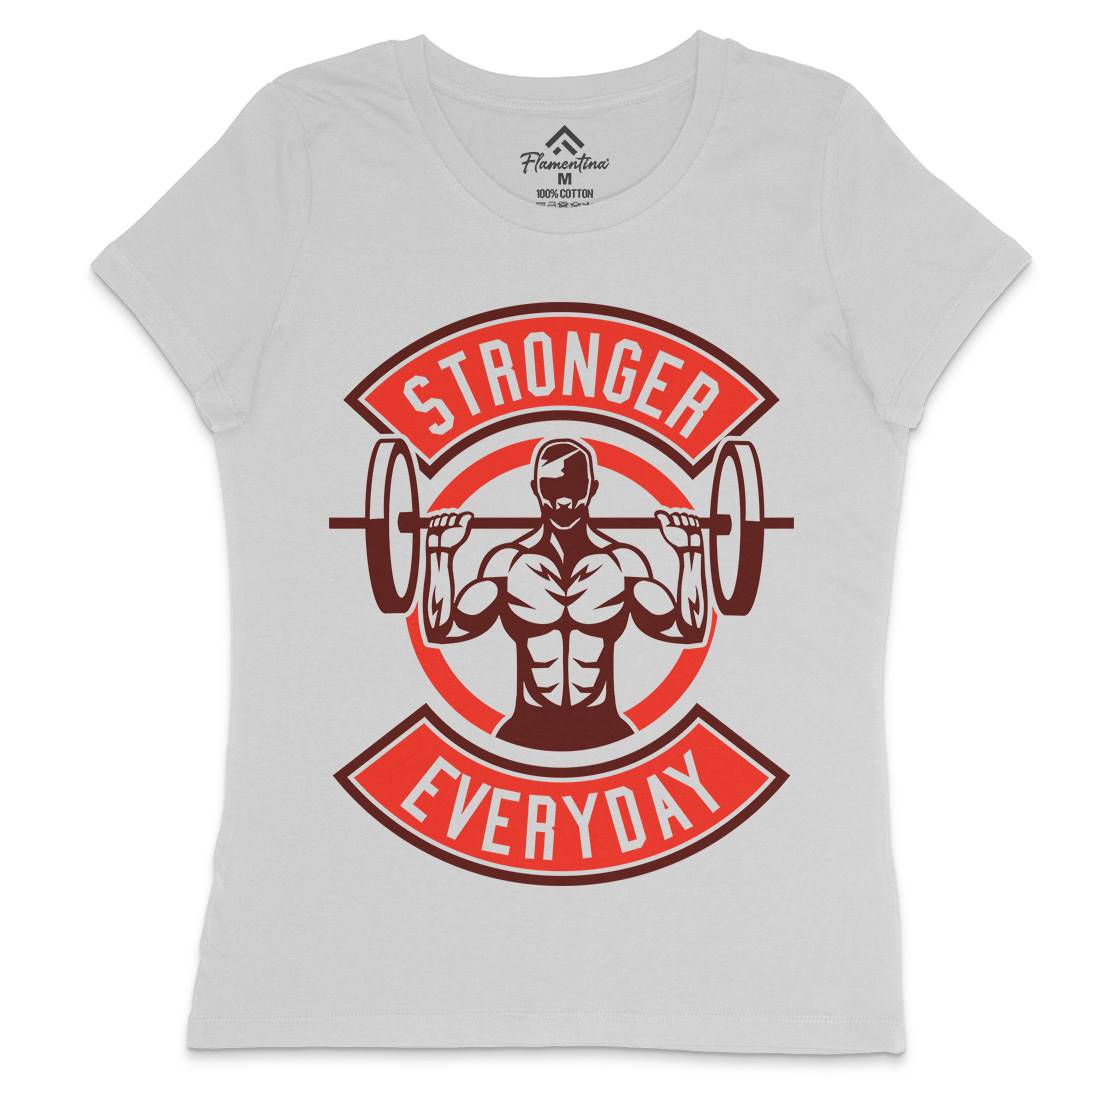 Stronger Everyday Womens Crew Neck T-Shirt Gym A289